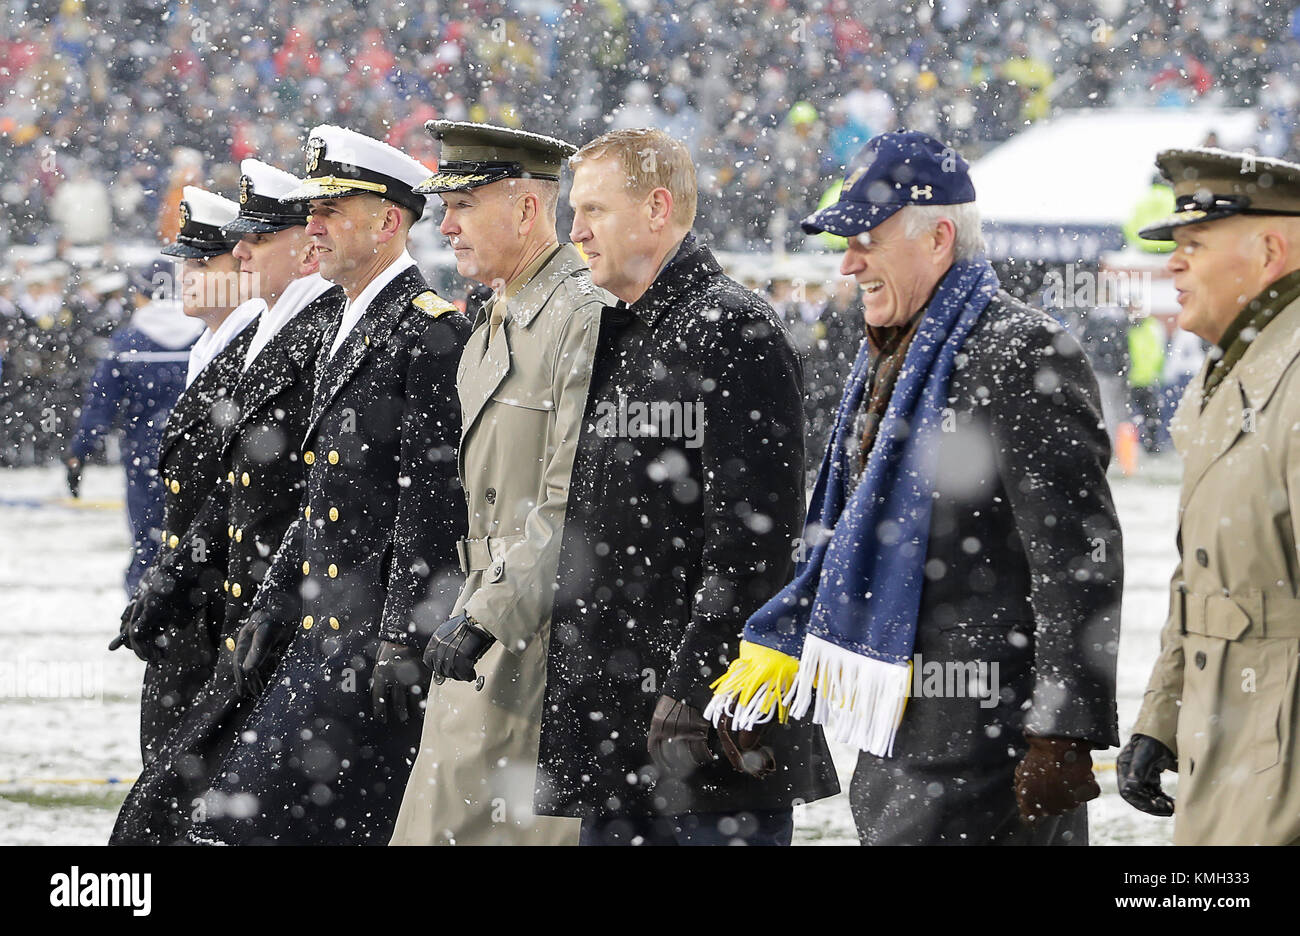 Philadelphia, Pennsylvania, USA. 9th Dec, 2017. Chairman of the Joint Chiefs of Staff, General Joseph Dunford, leads the Navy side out to the coin toss before the 118th Army Navy game between the United States Naval Academy Midshipmen and the United States Military Academy Cadets at Lincoln Financial Field in Philadelphia, Pennsylvania. Justin Cooper/CSM/Alamy Live News Stock Photo